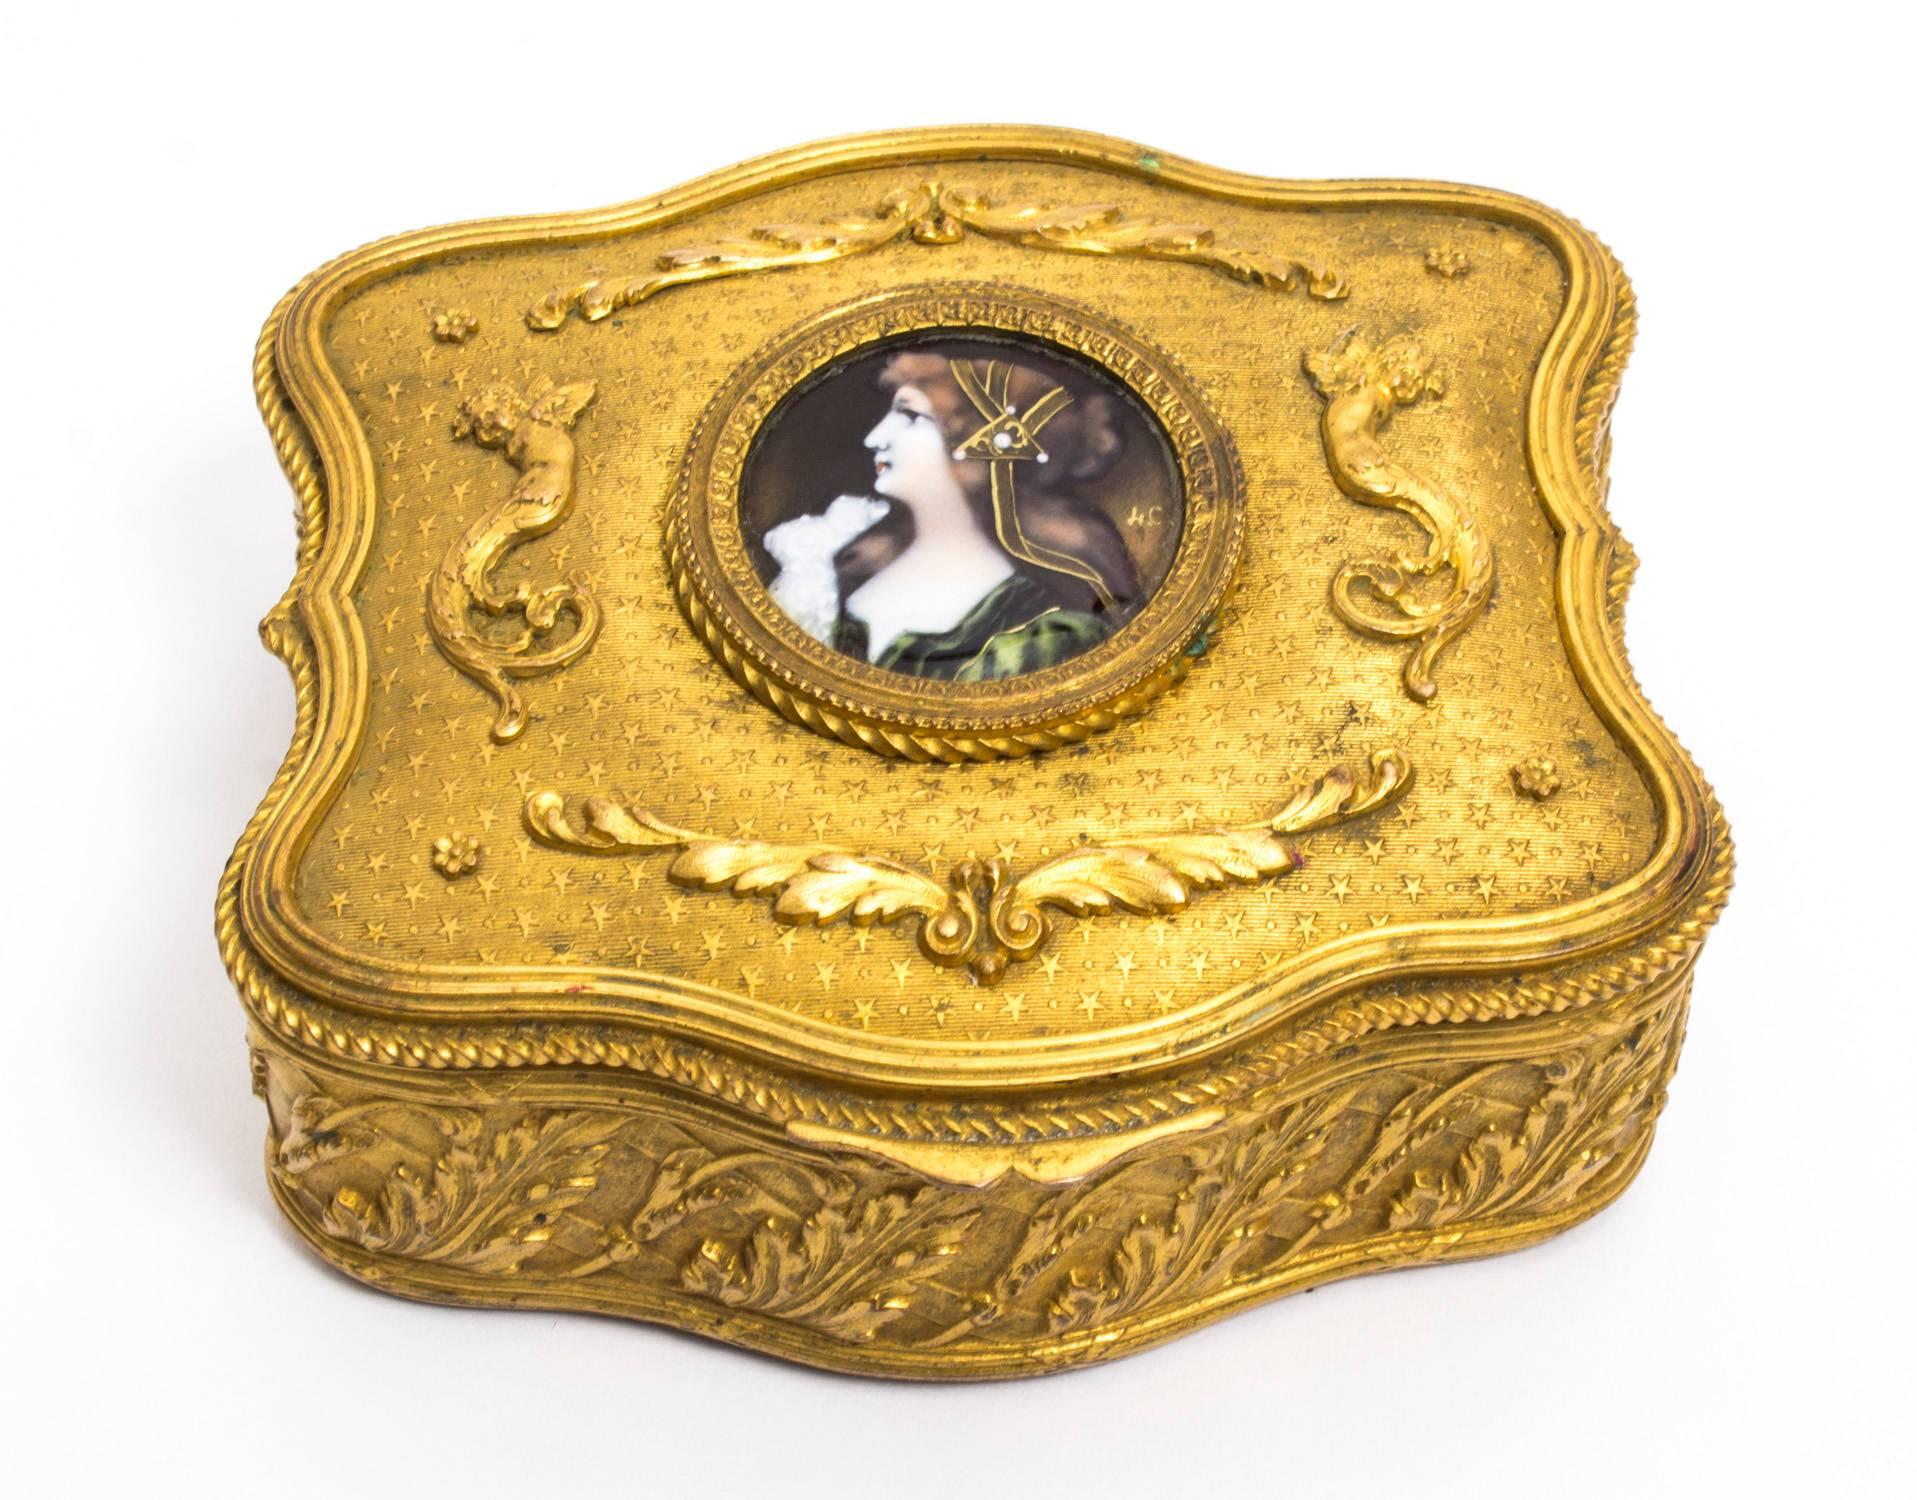 This is a beautiful antique Napoleon III gilded ormolu serpentine shaped jewellery casket, circa 1860 in date.

The top, front, sides and back are beautifully cast and tooled in gilt bronze. The rope outline, delicate leaf work and filigree